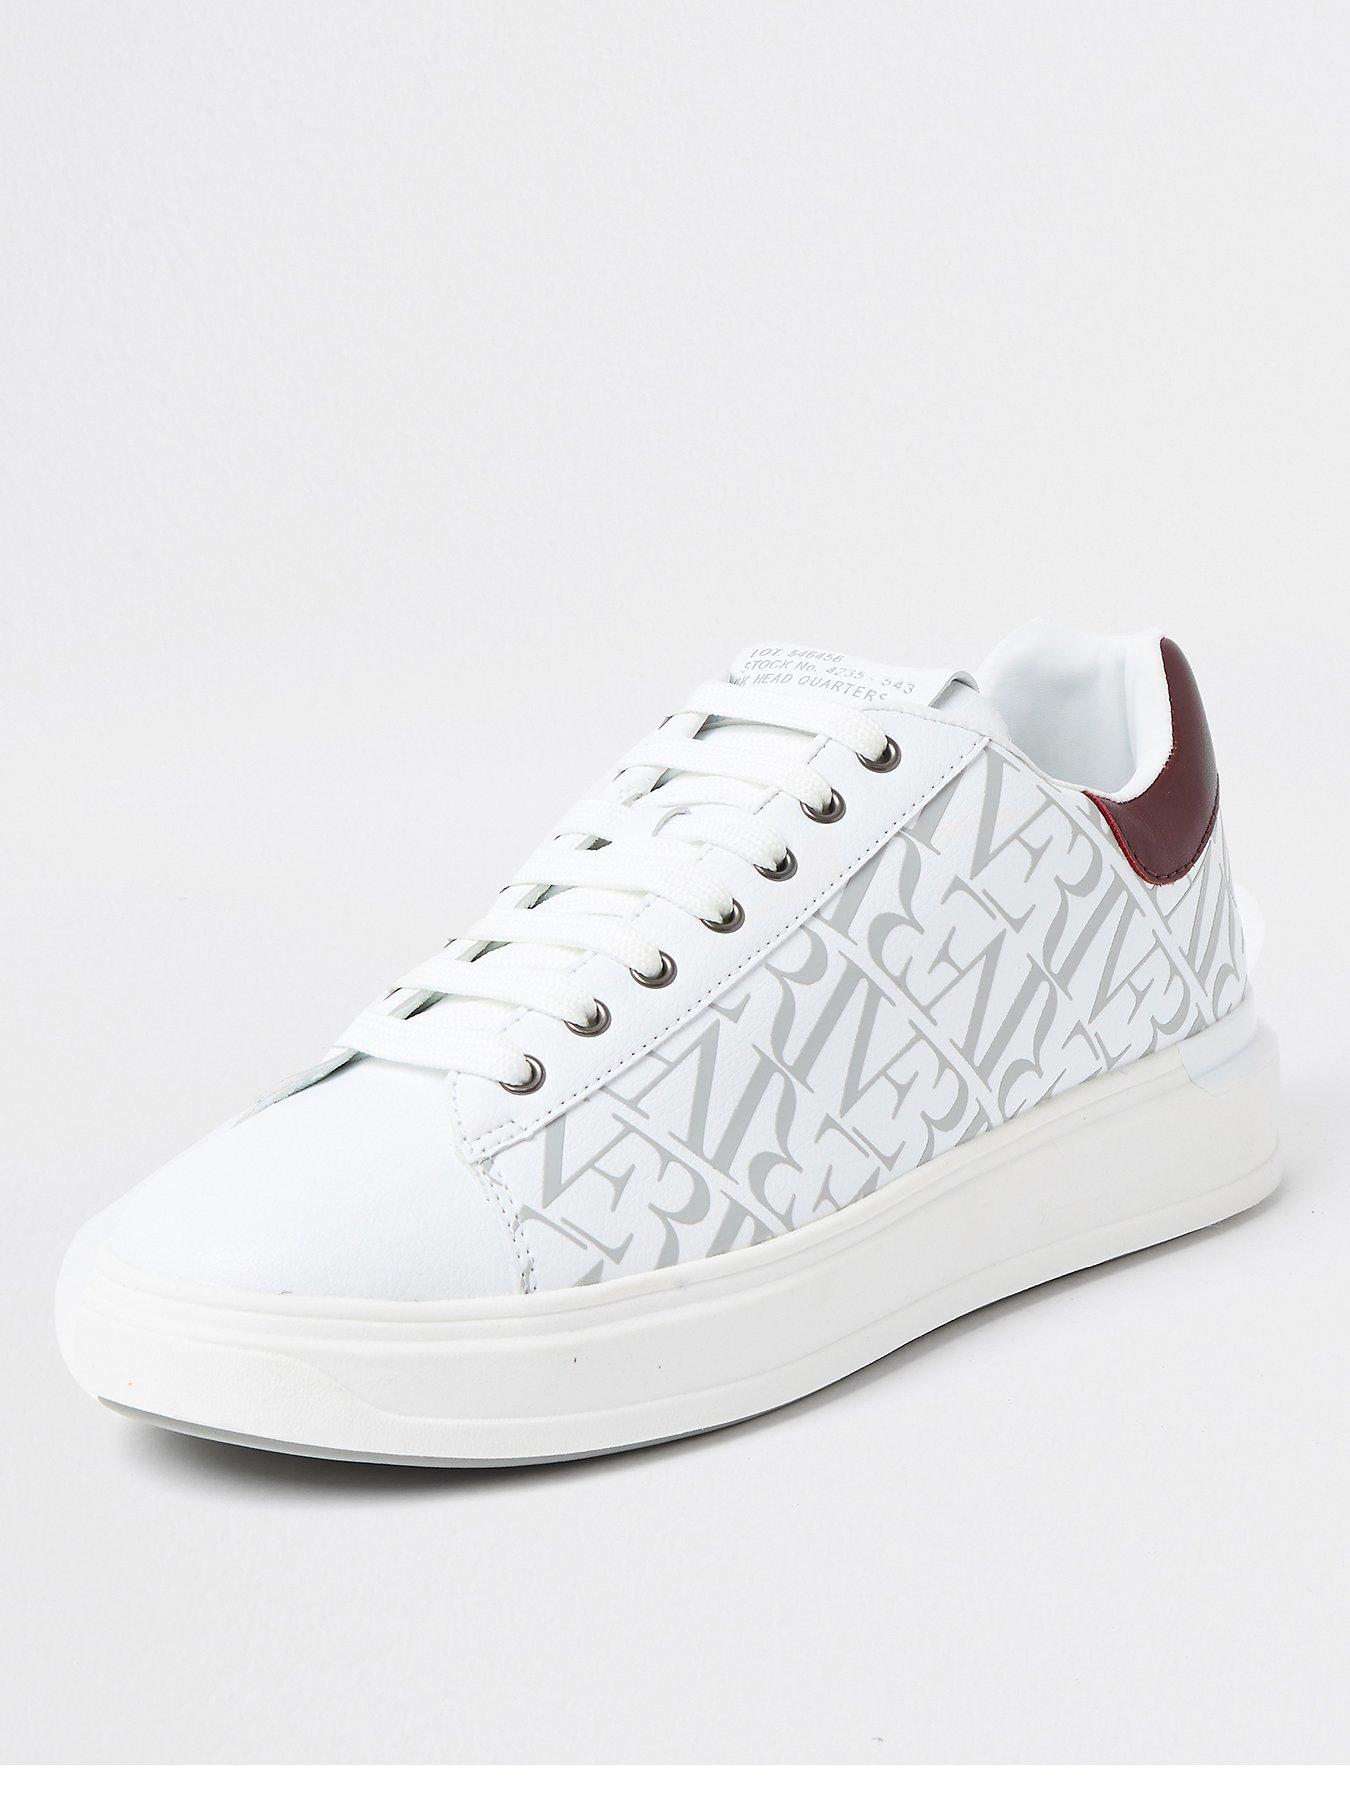 river island mens trainers